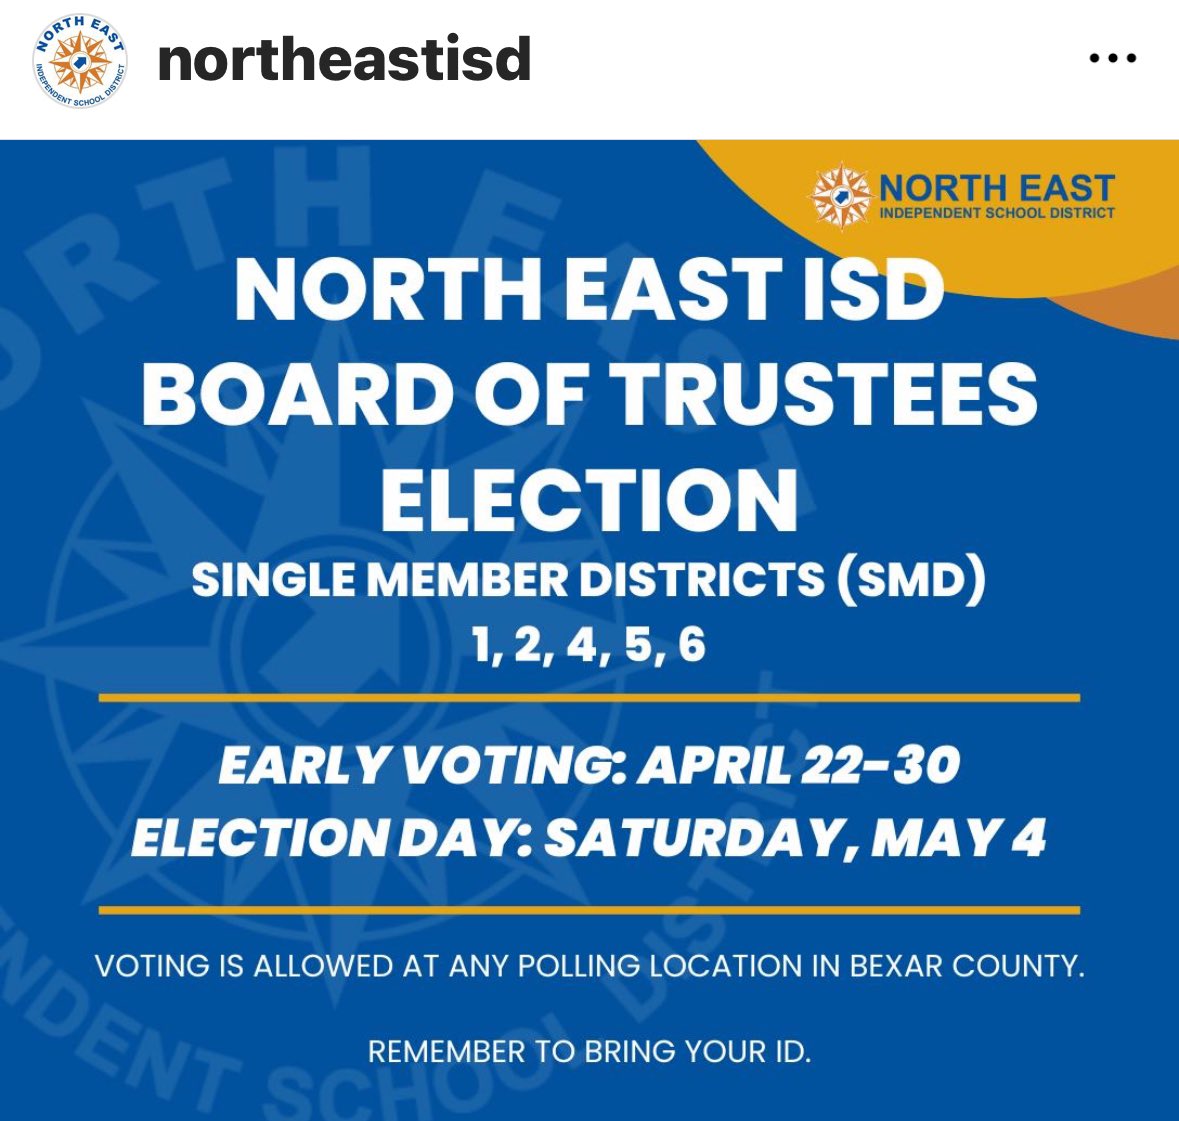 Be sure to Vote! 
#theNEISDway